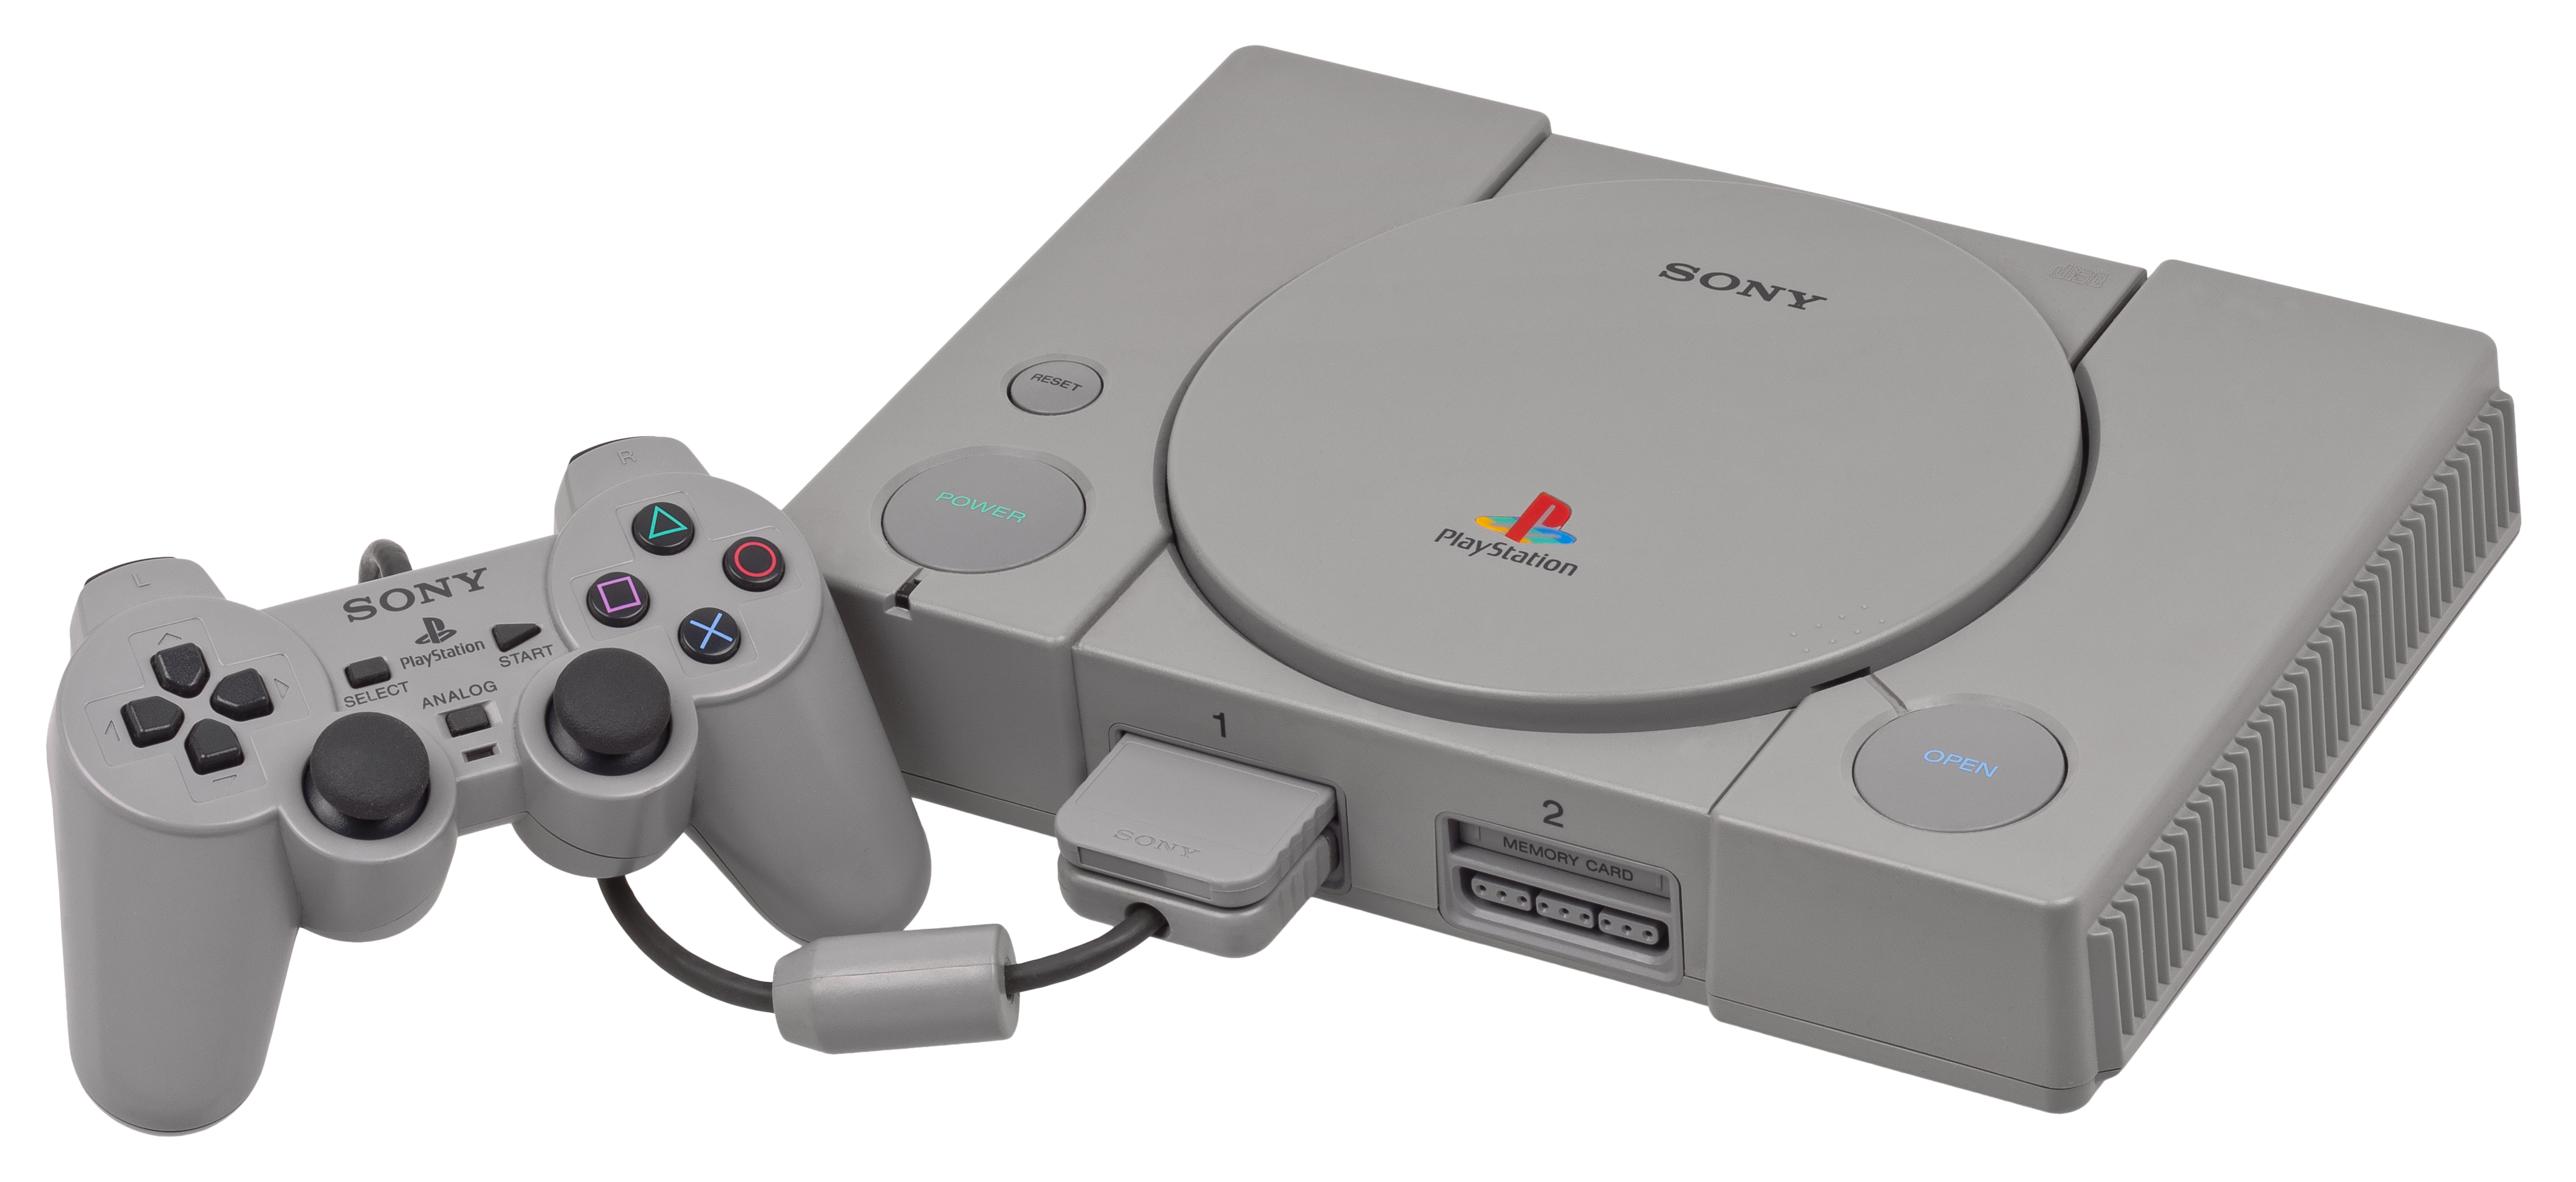 File:Playstation-now.png - Wikipedia